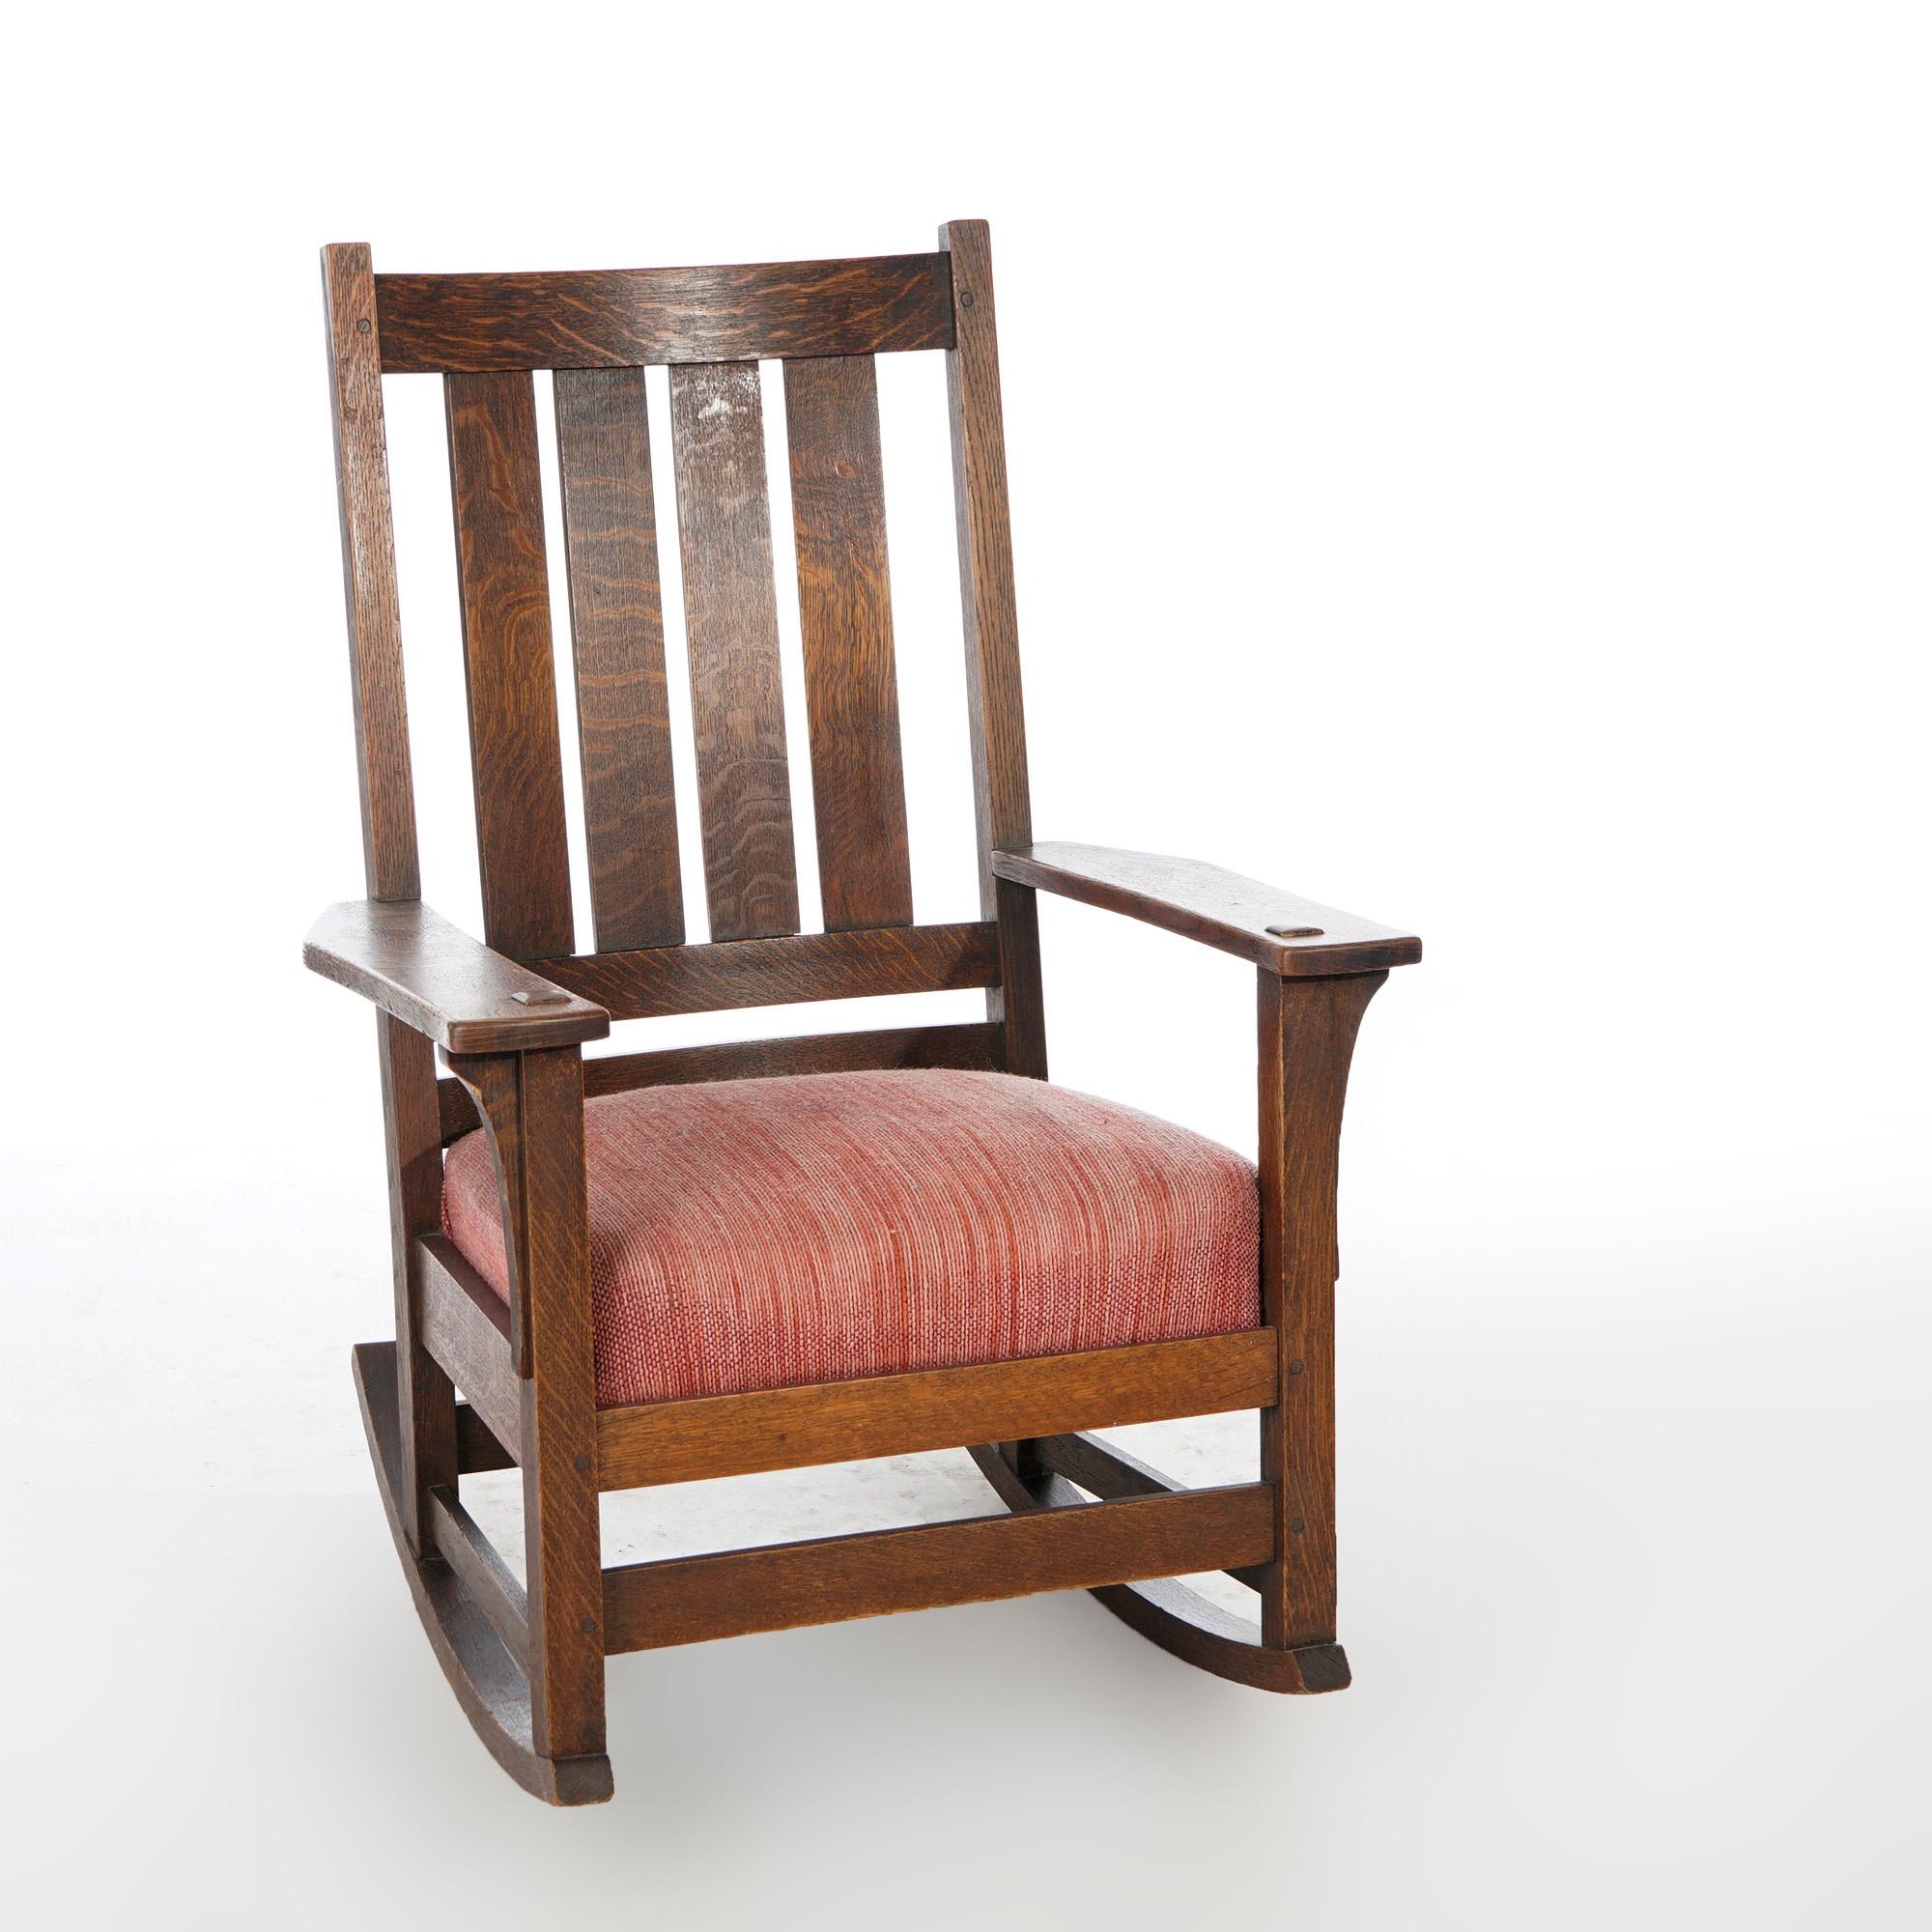 An antique Arts & Crafts Mission L & JG Stickley rocker offers quarter sawn oak construction with curved slat back, arms with concave corbels, and original label as photographed, c1910

Measures- 40.25'' H x 27.75'' W x 29'' D.